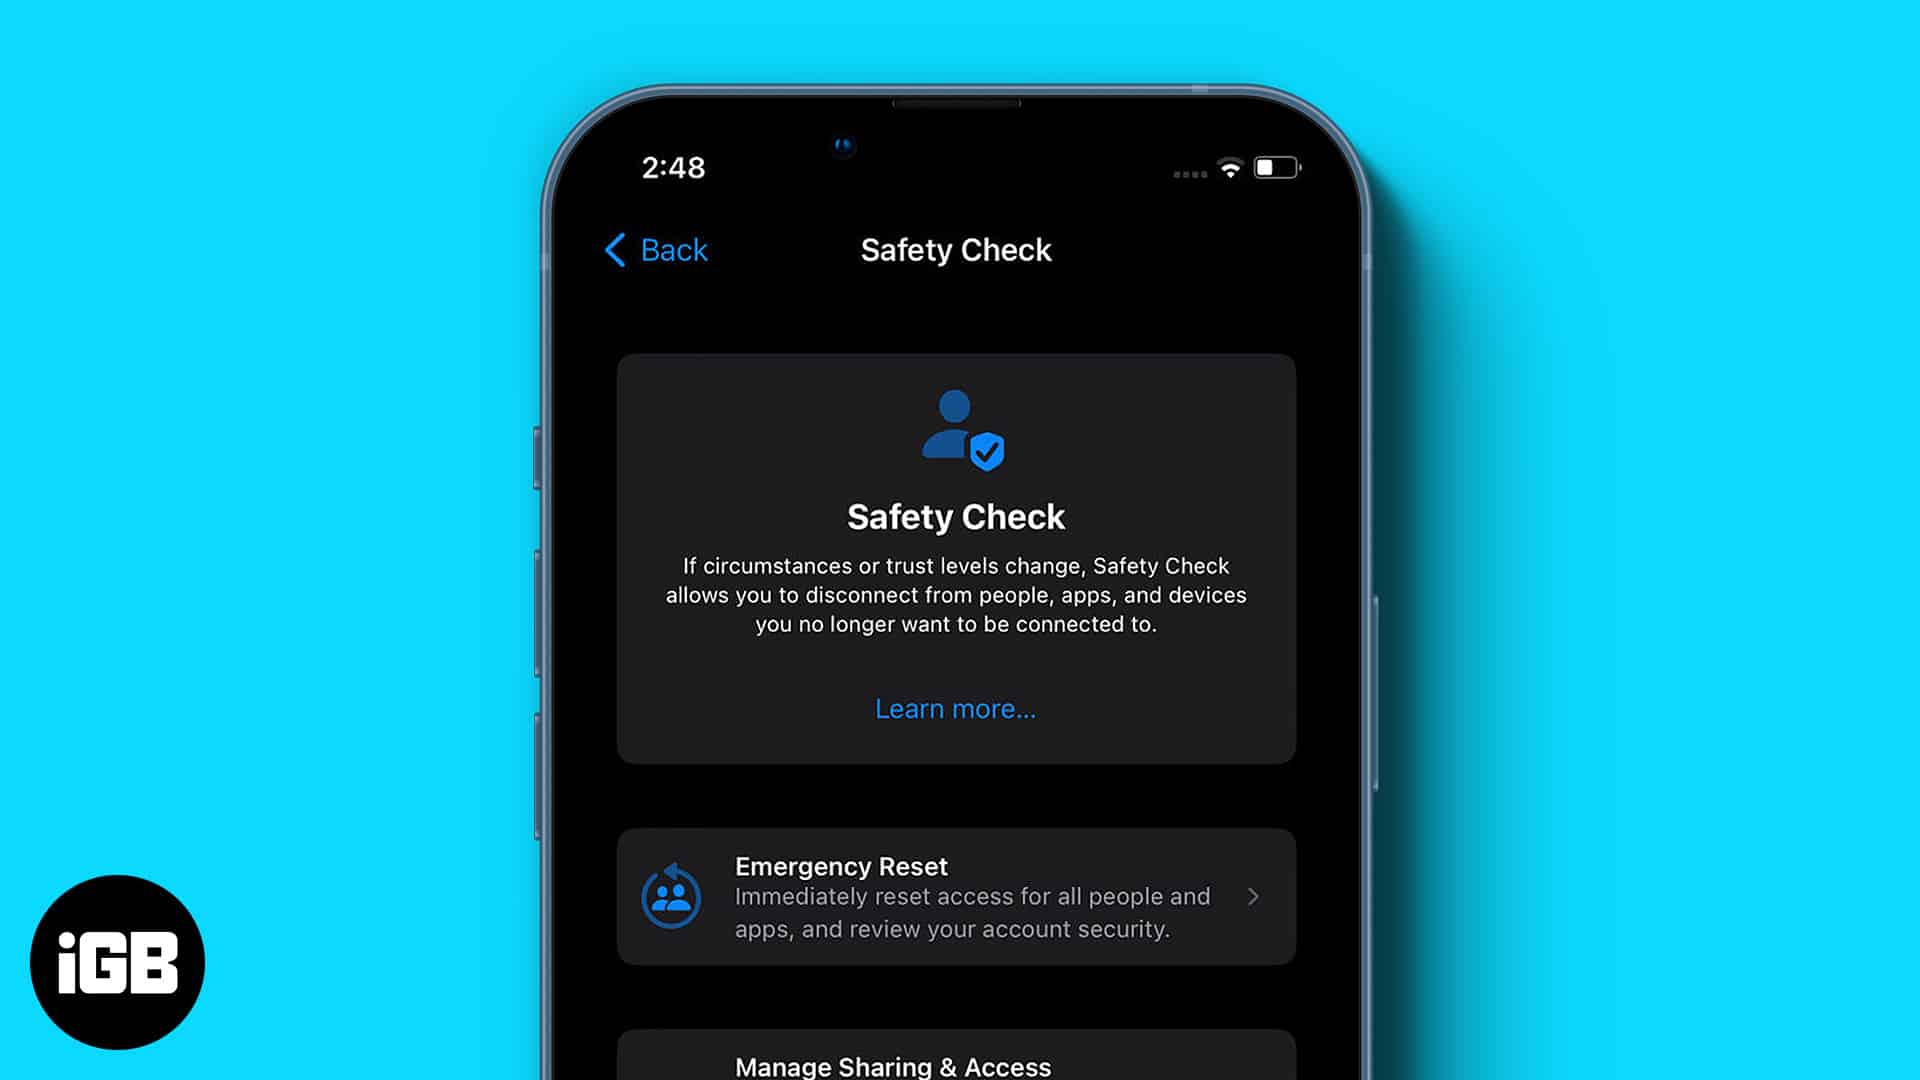 How to use safety check on iphone